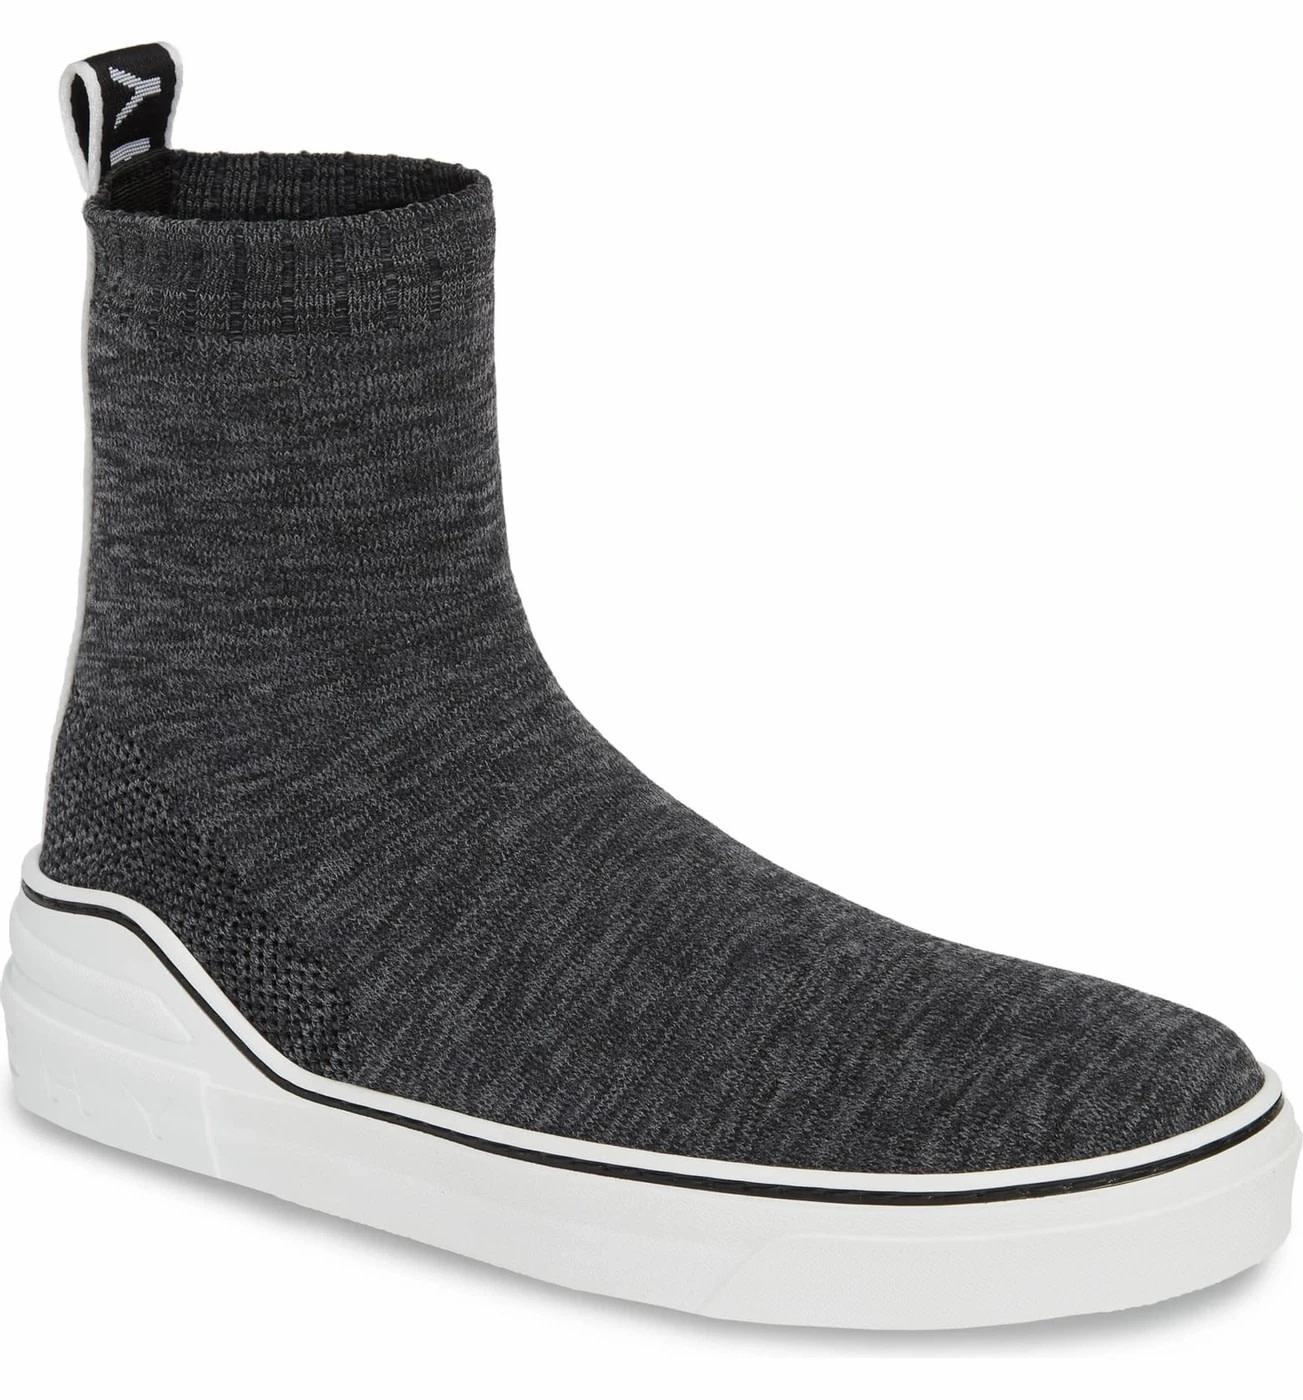 Designed in a sock-like style, these George V sneakers from Givenchy are made with knitted fabric and feature an easy slip-on style. Play casual and cool wearing this pair that comes with contrasting white rubber soles and logo-appliqued pull tabs